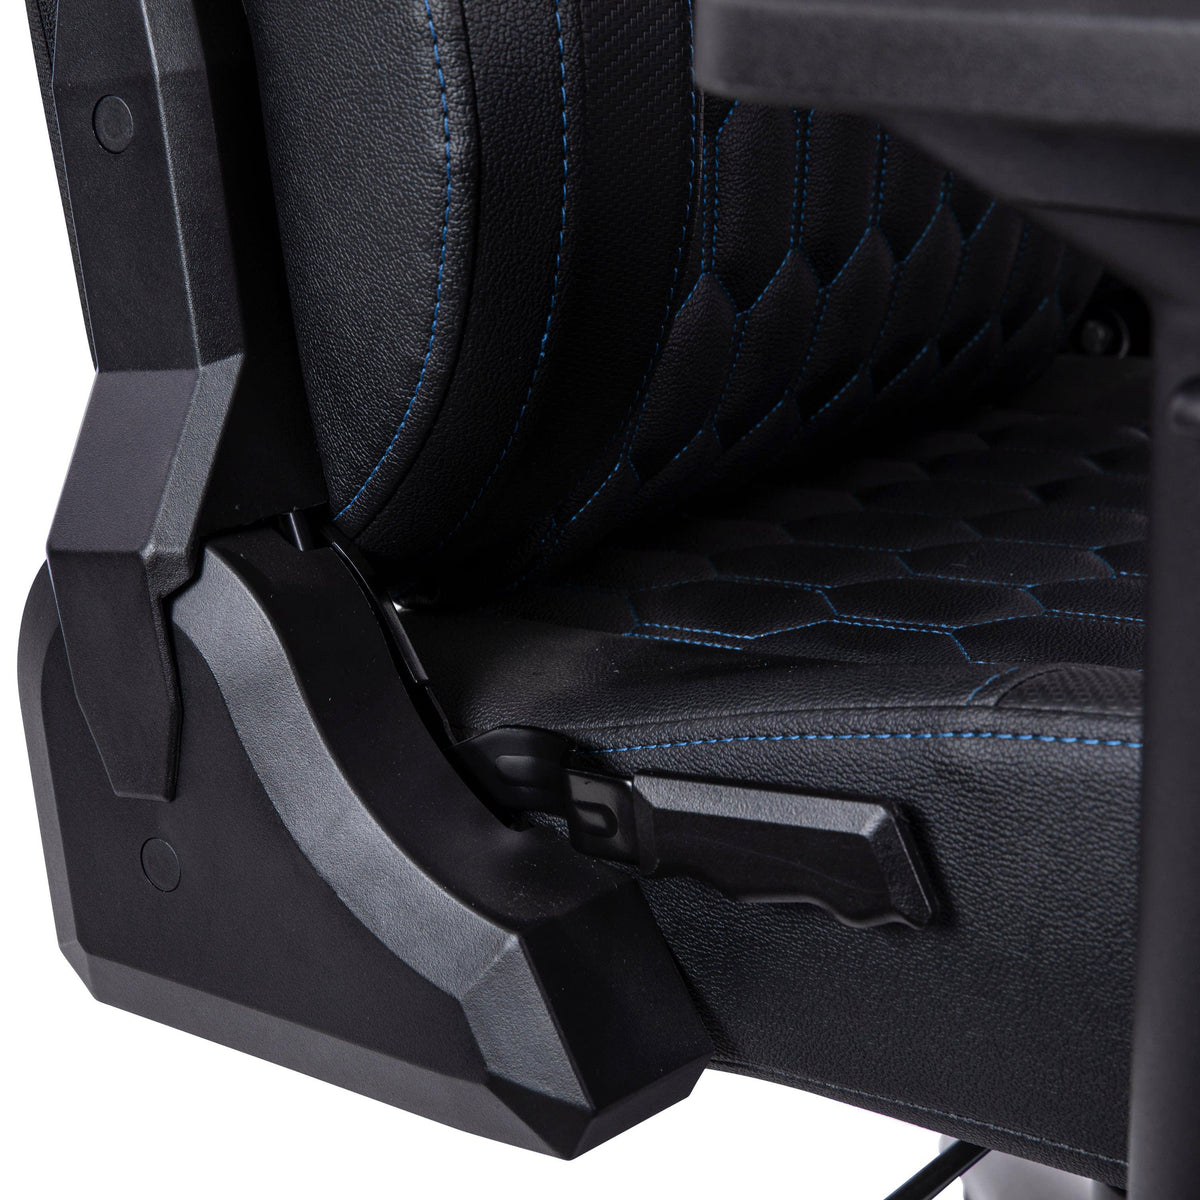 Black with Blue Trim |#| Ergonomic Gaming Chair with 4D Armrests, Headrest, & Lumbar Support-Black/Blue